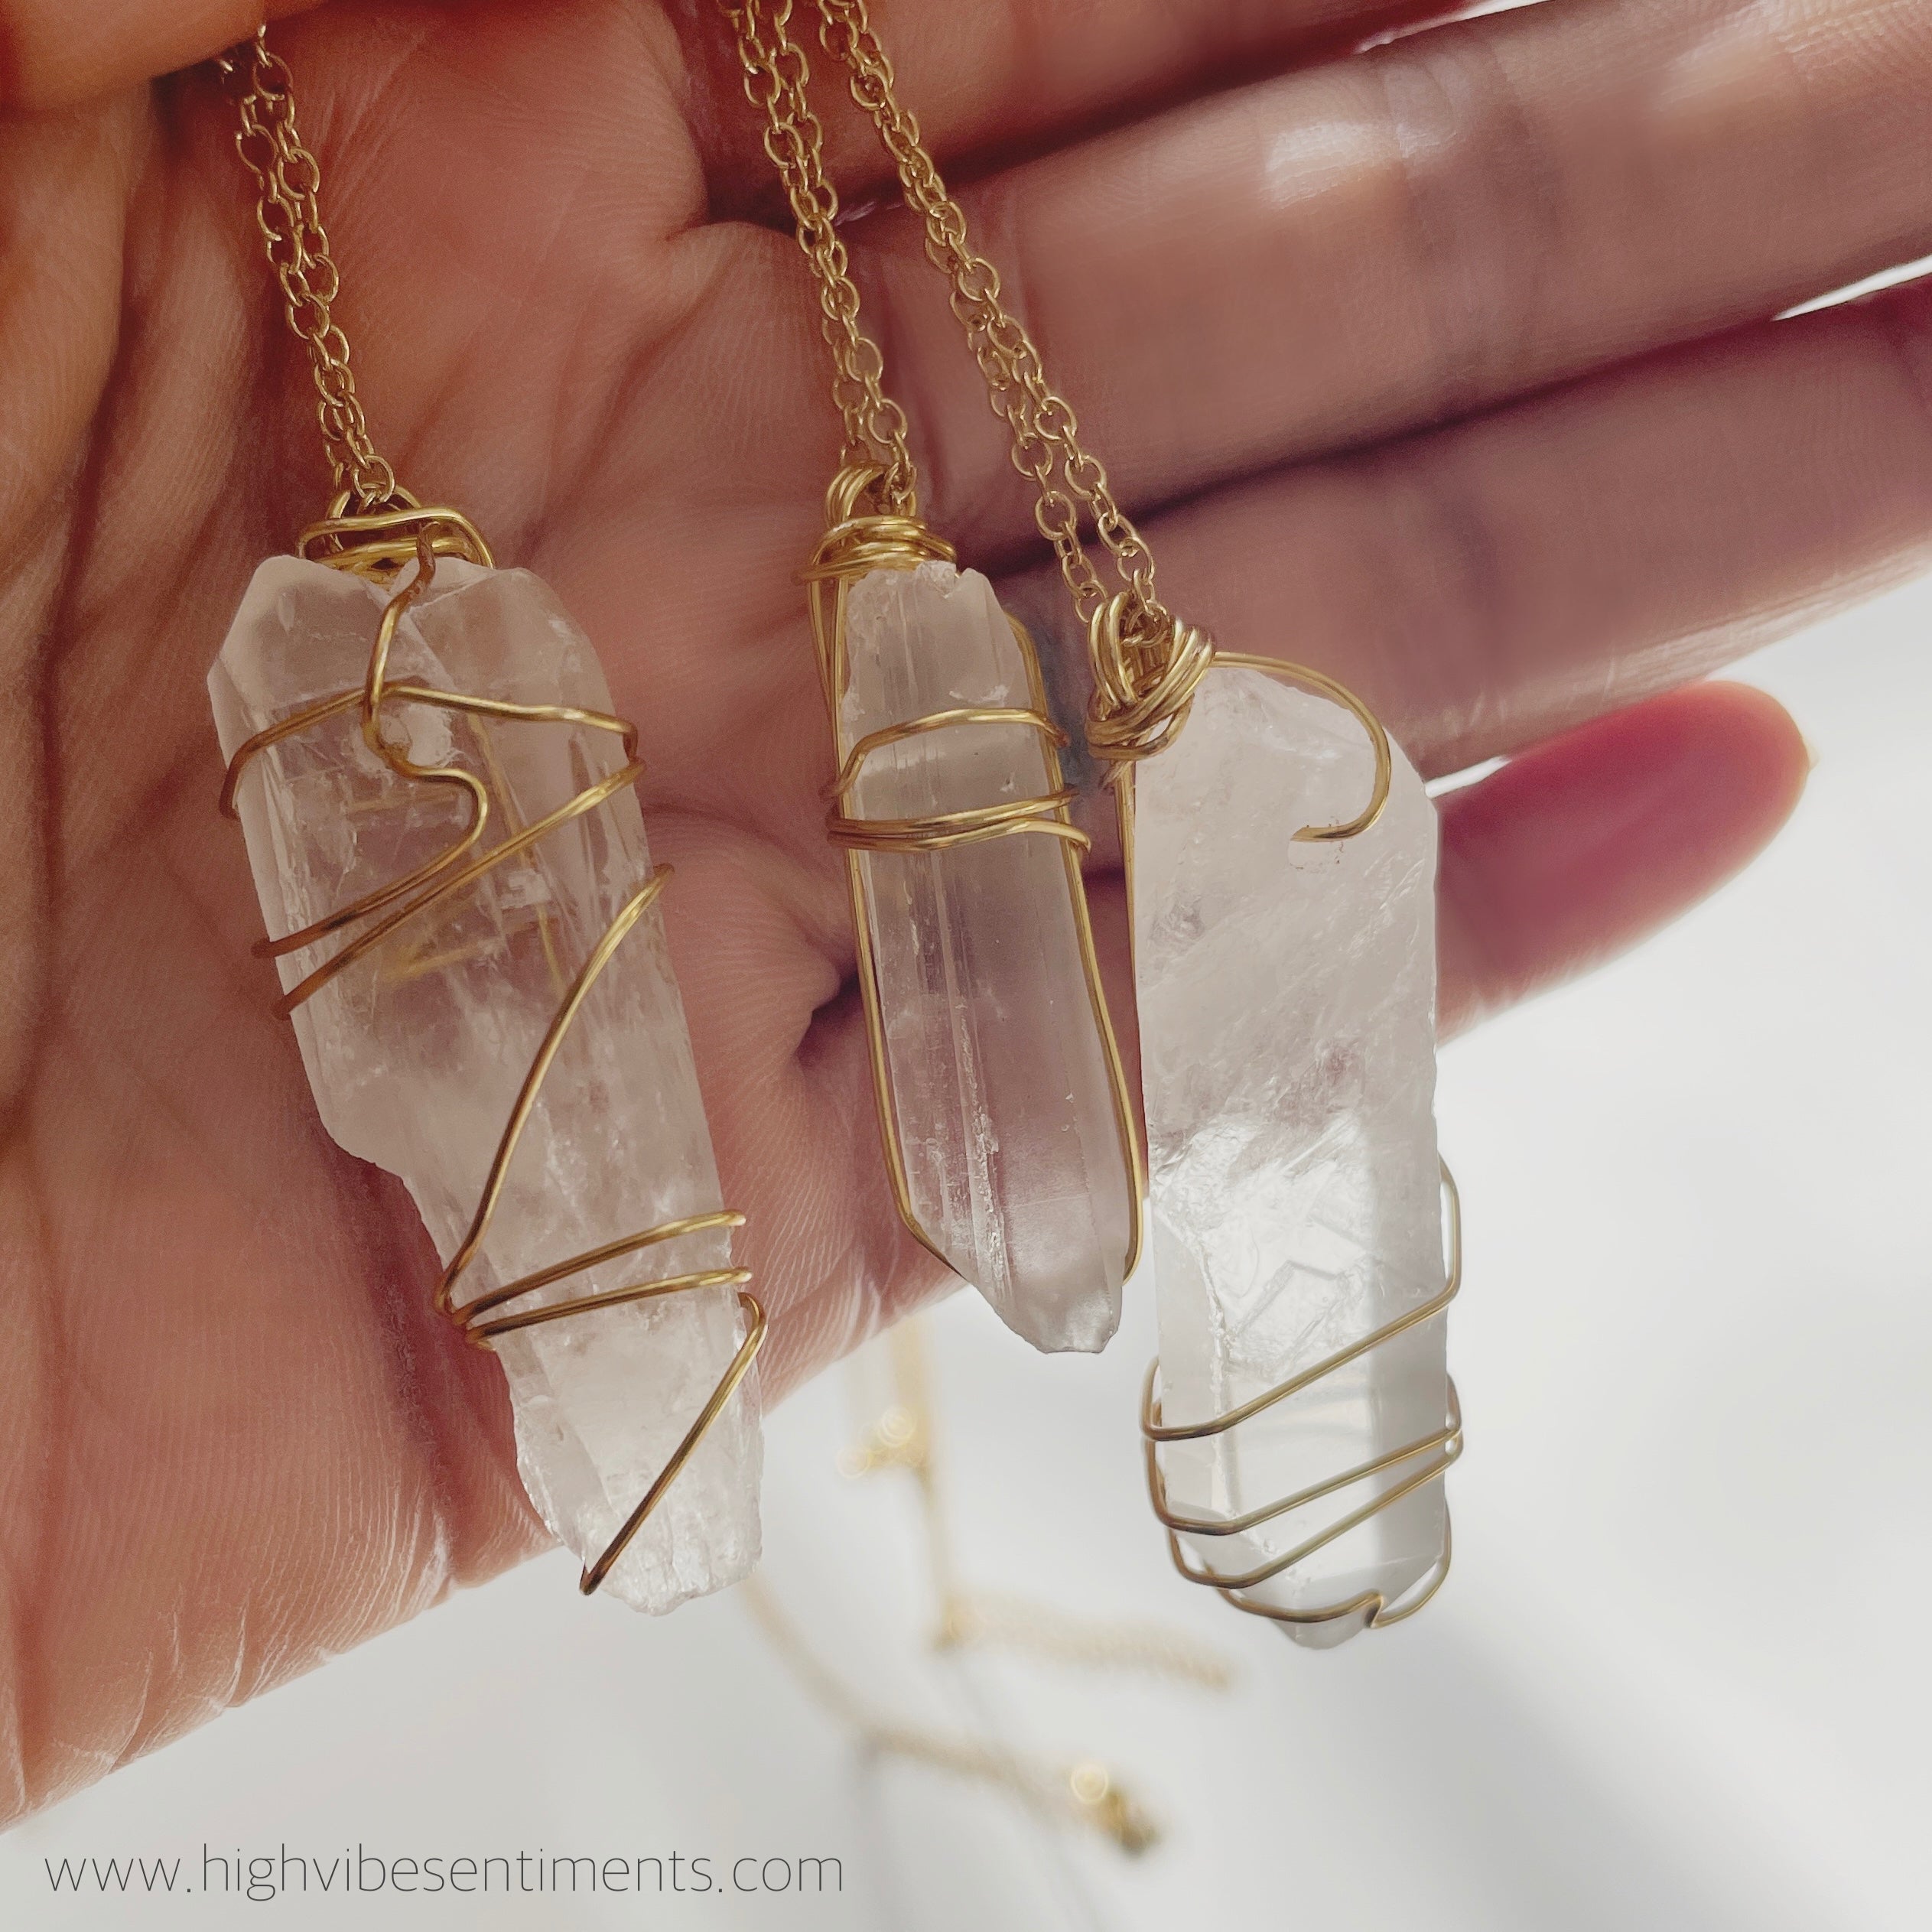 Buy Natural Healing Stone Pendant Necklace Handmade Wire Wrapped Raw Crystal  Pendant Stone Jewelry Online in India - Etsy